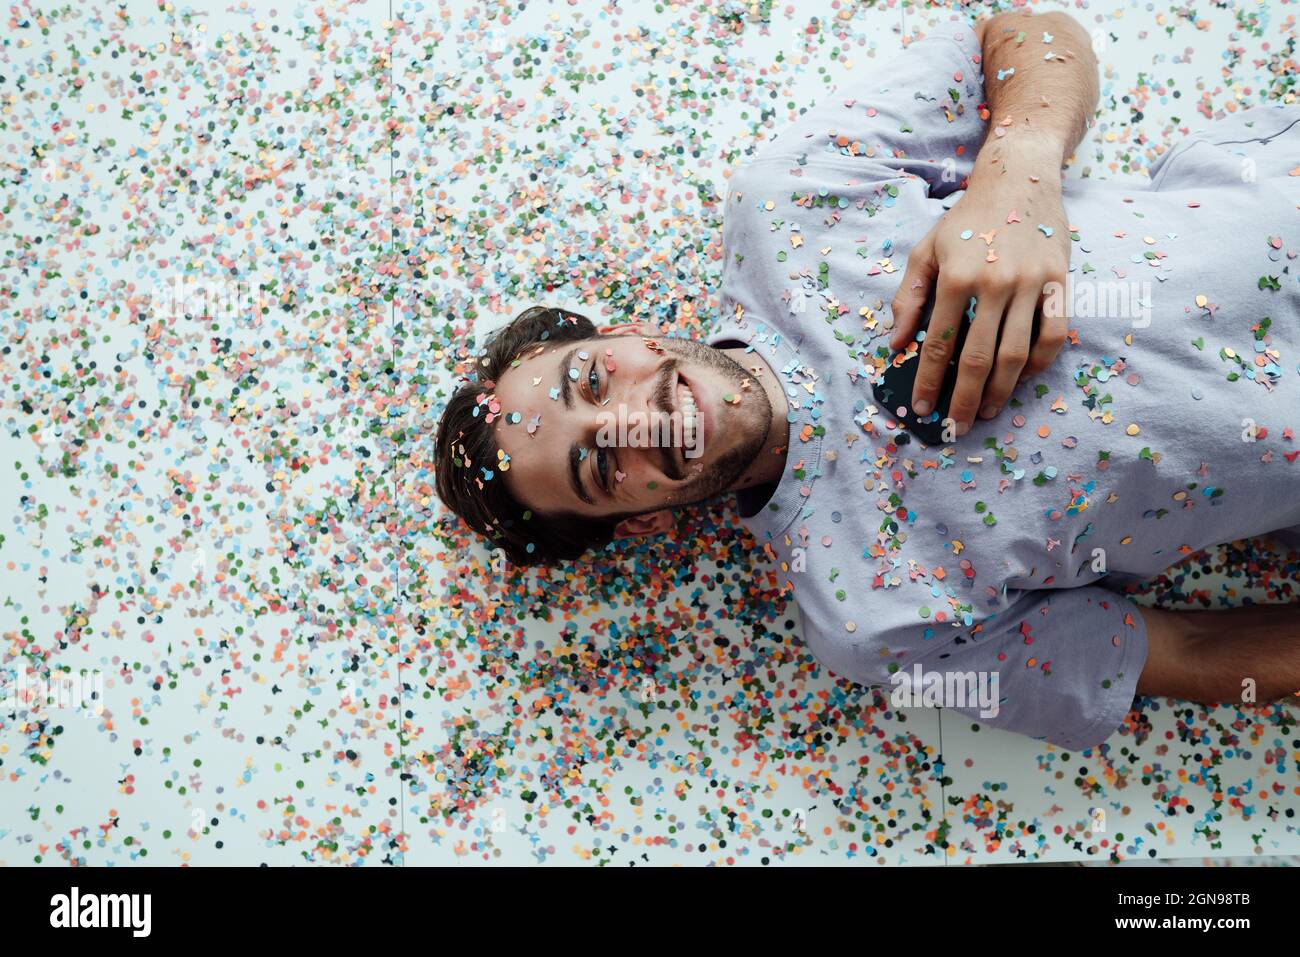 Smiling man lying with confetti on floor Stock Photo